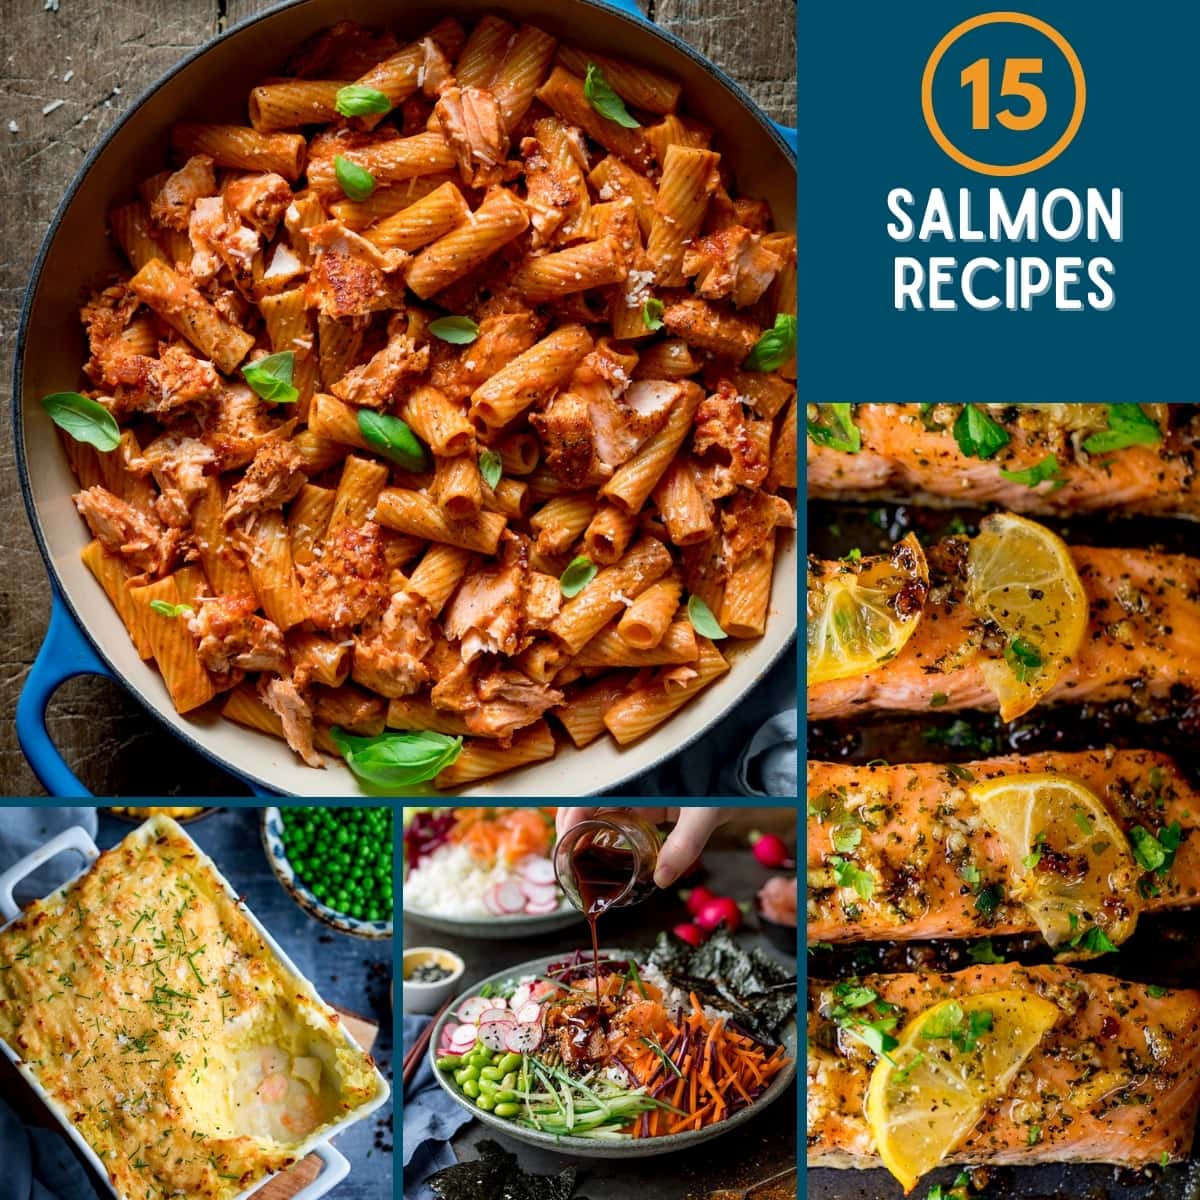 Collage of Salmon recipe images